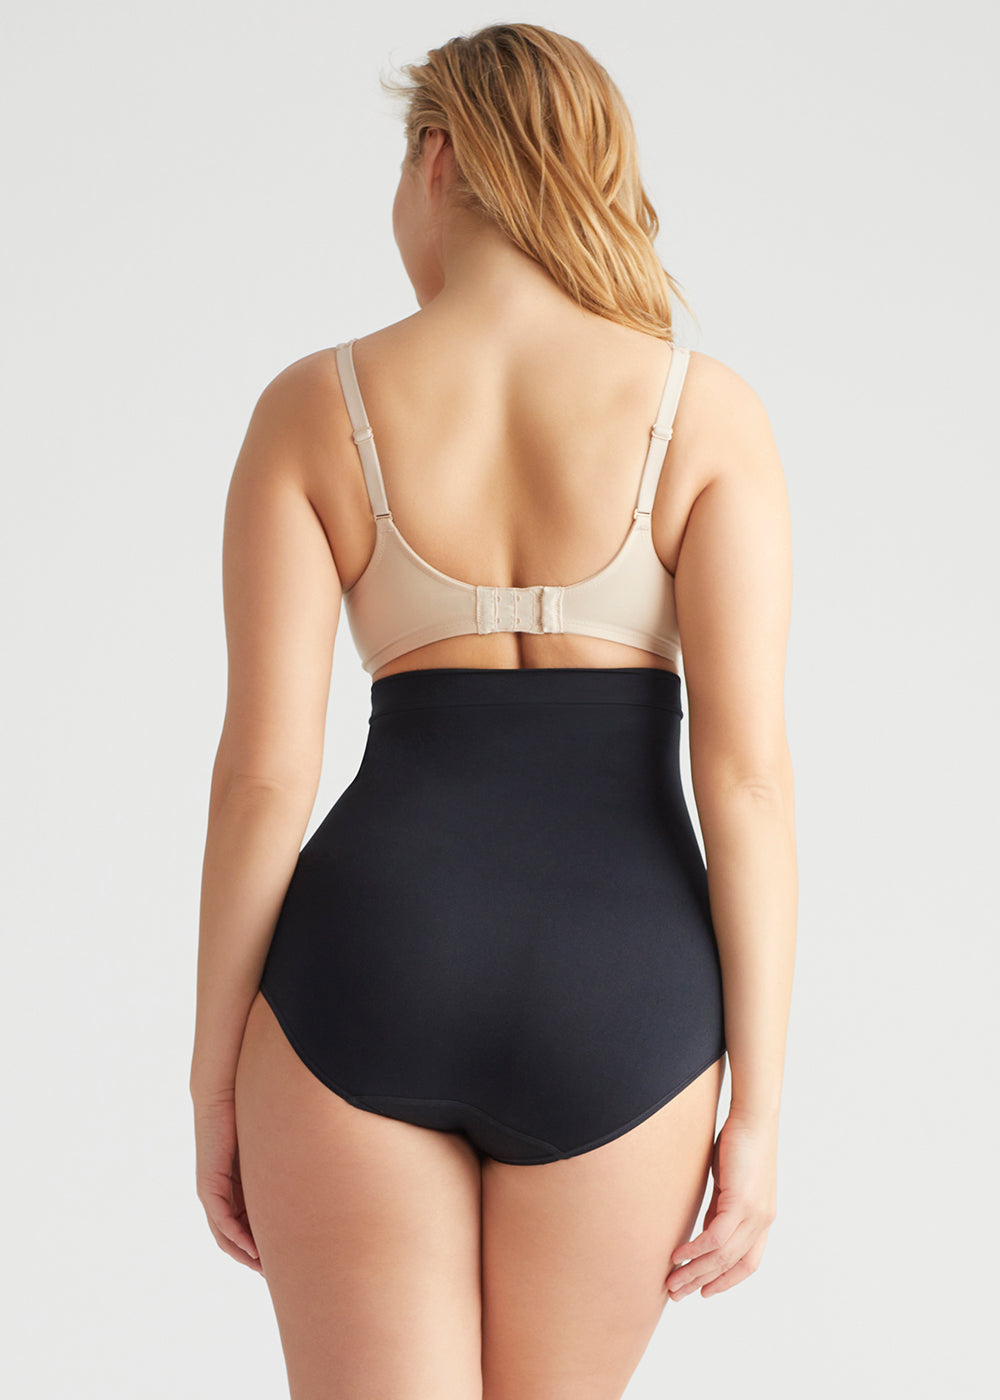 Yummie Cooling FX High-Waist Shaping Brief, Black, Size S/M, from Soma